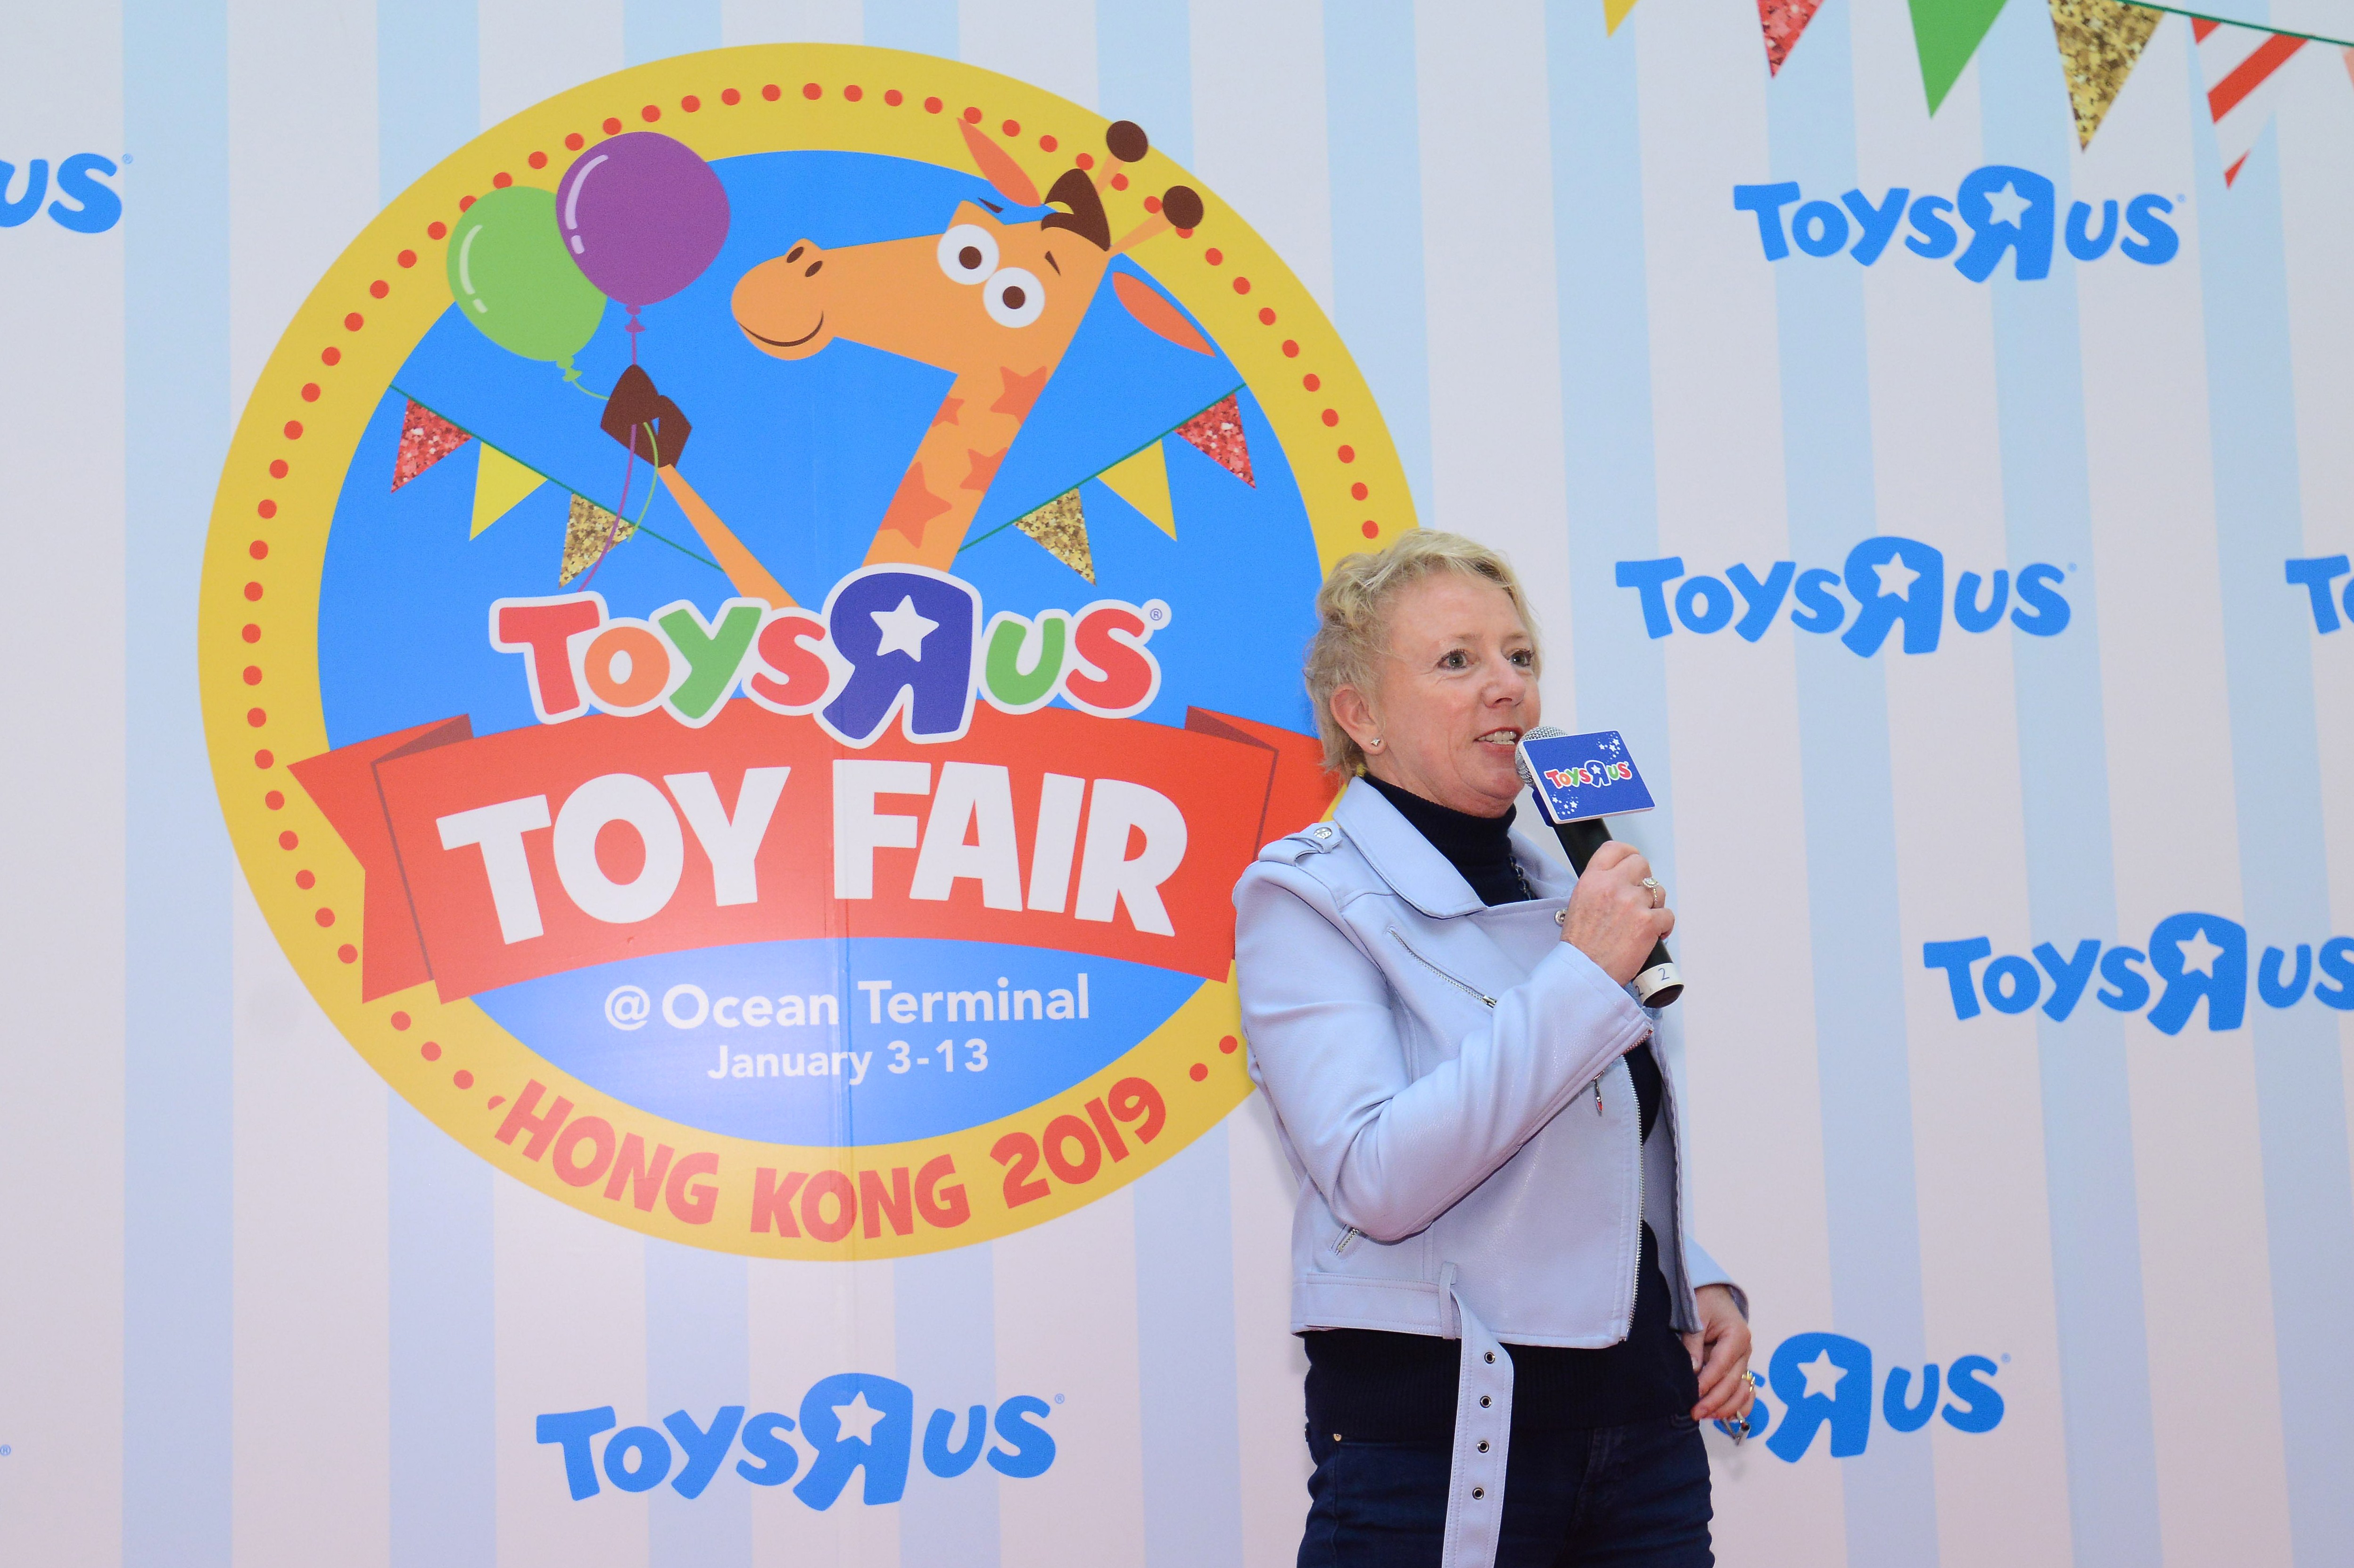 Jo Hall, Toys ‘R’ Us Asia’s chief commercial officer for Greater China and Southeast Asia, says the recession-proof nature of the demand for toys, the right store locations and a fresh offering of fun and educational experiences for the whole family are key to its success. Photo: Handout